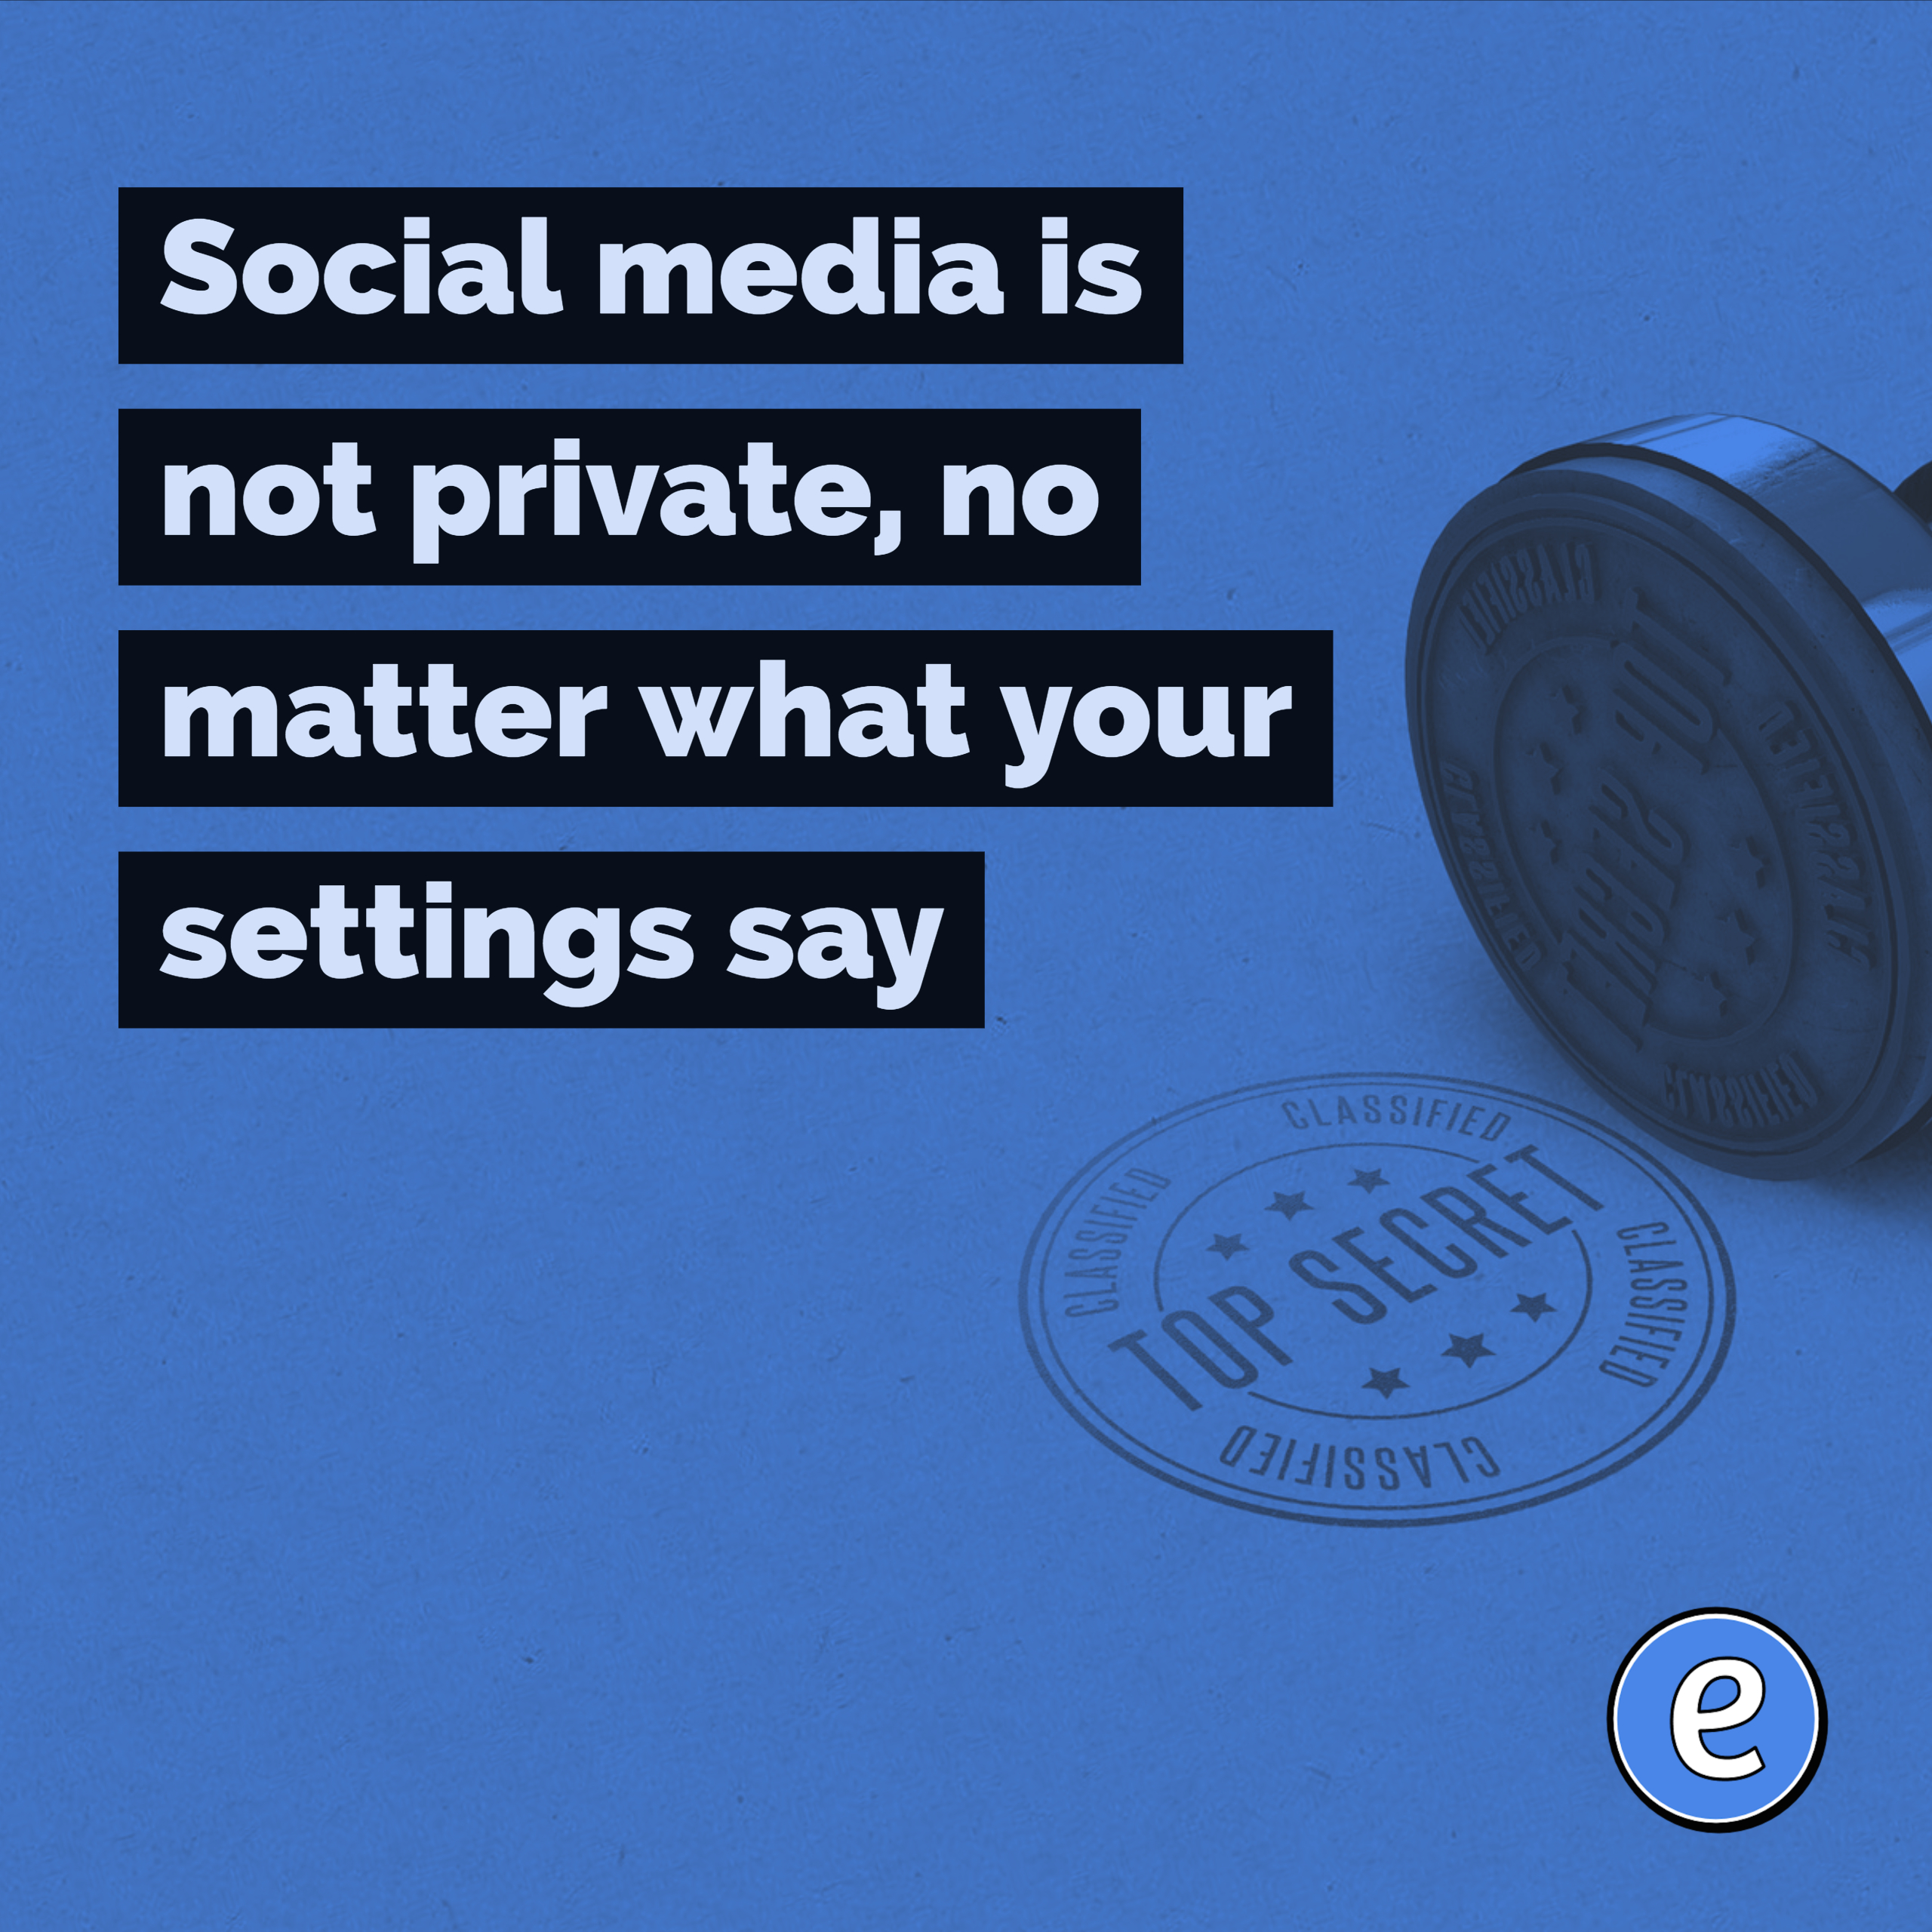 Social media is not private, no matter what your settings say